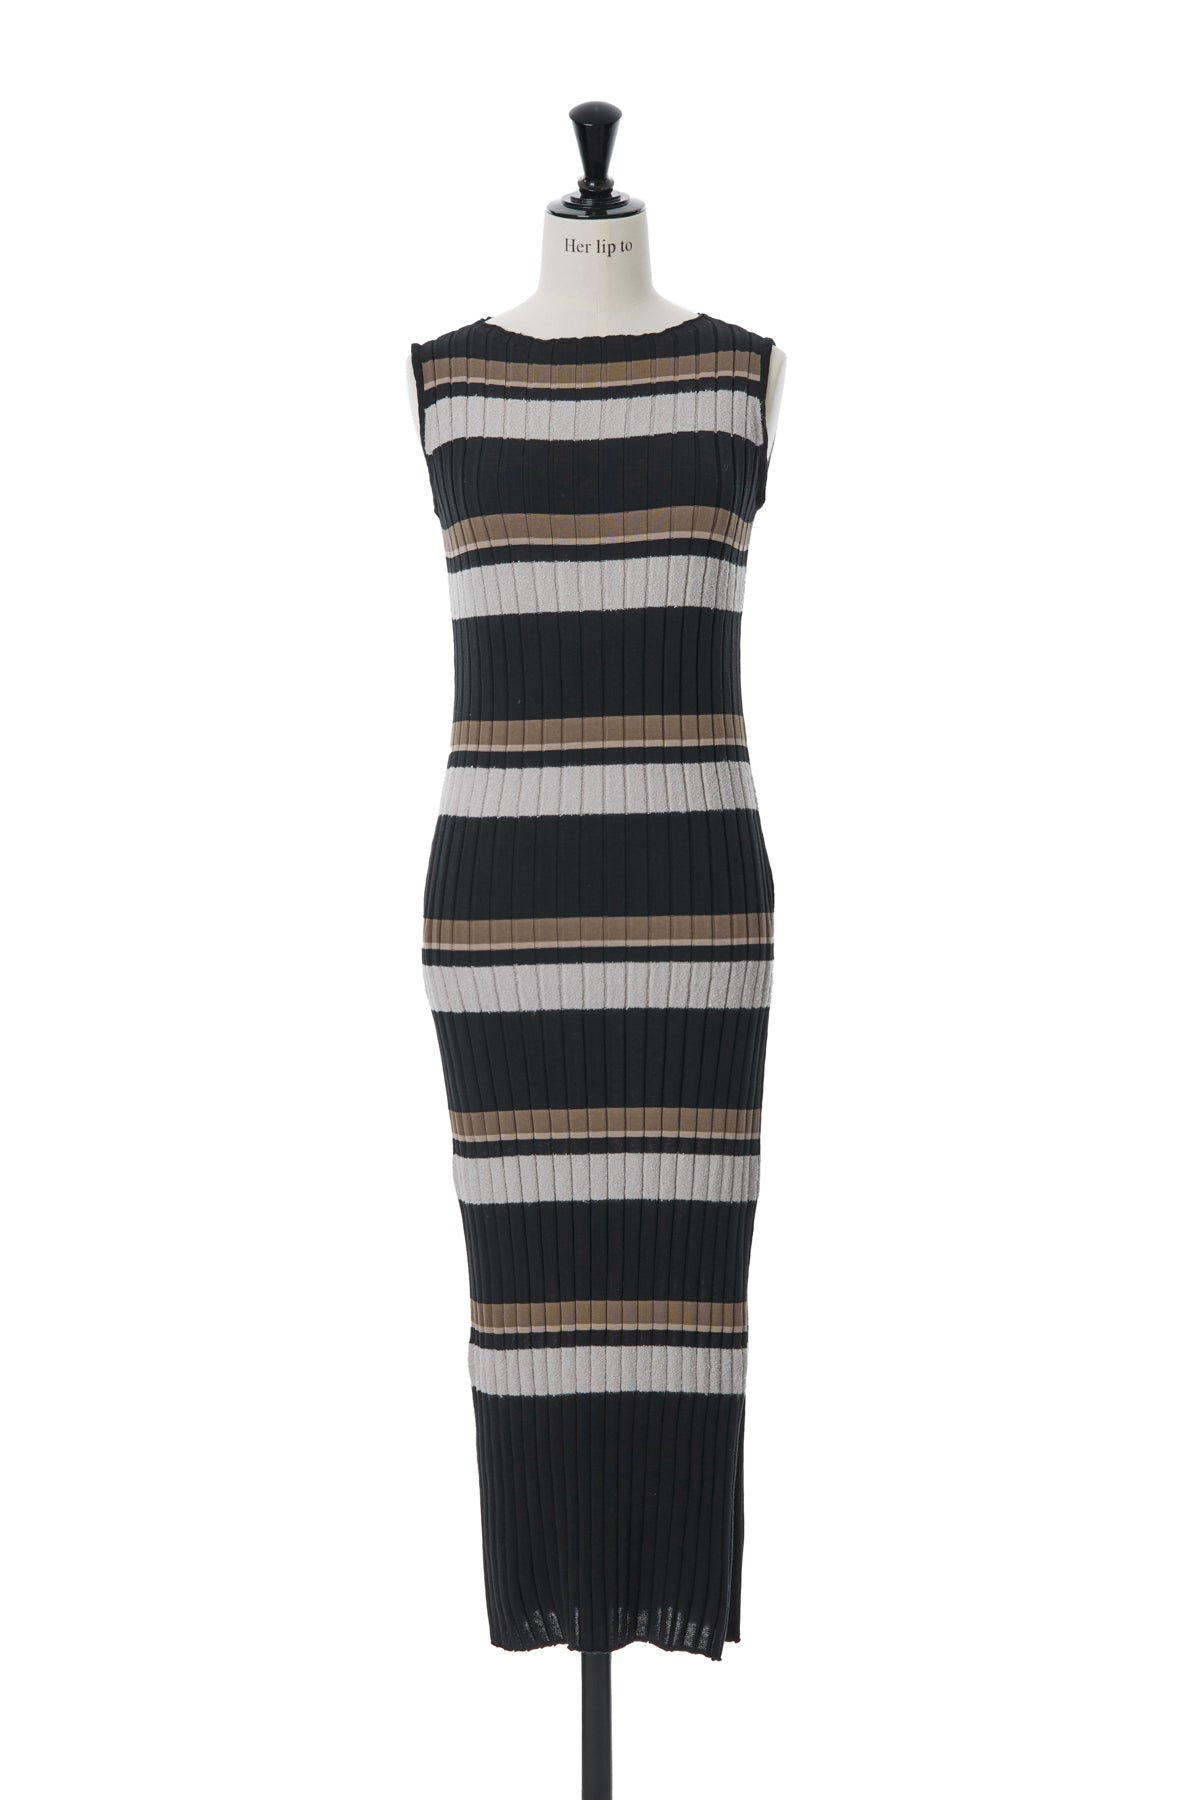 Her lip to／Cotton Striped Ribbed Dress